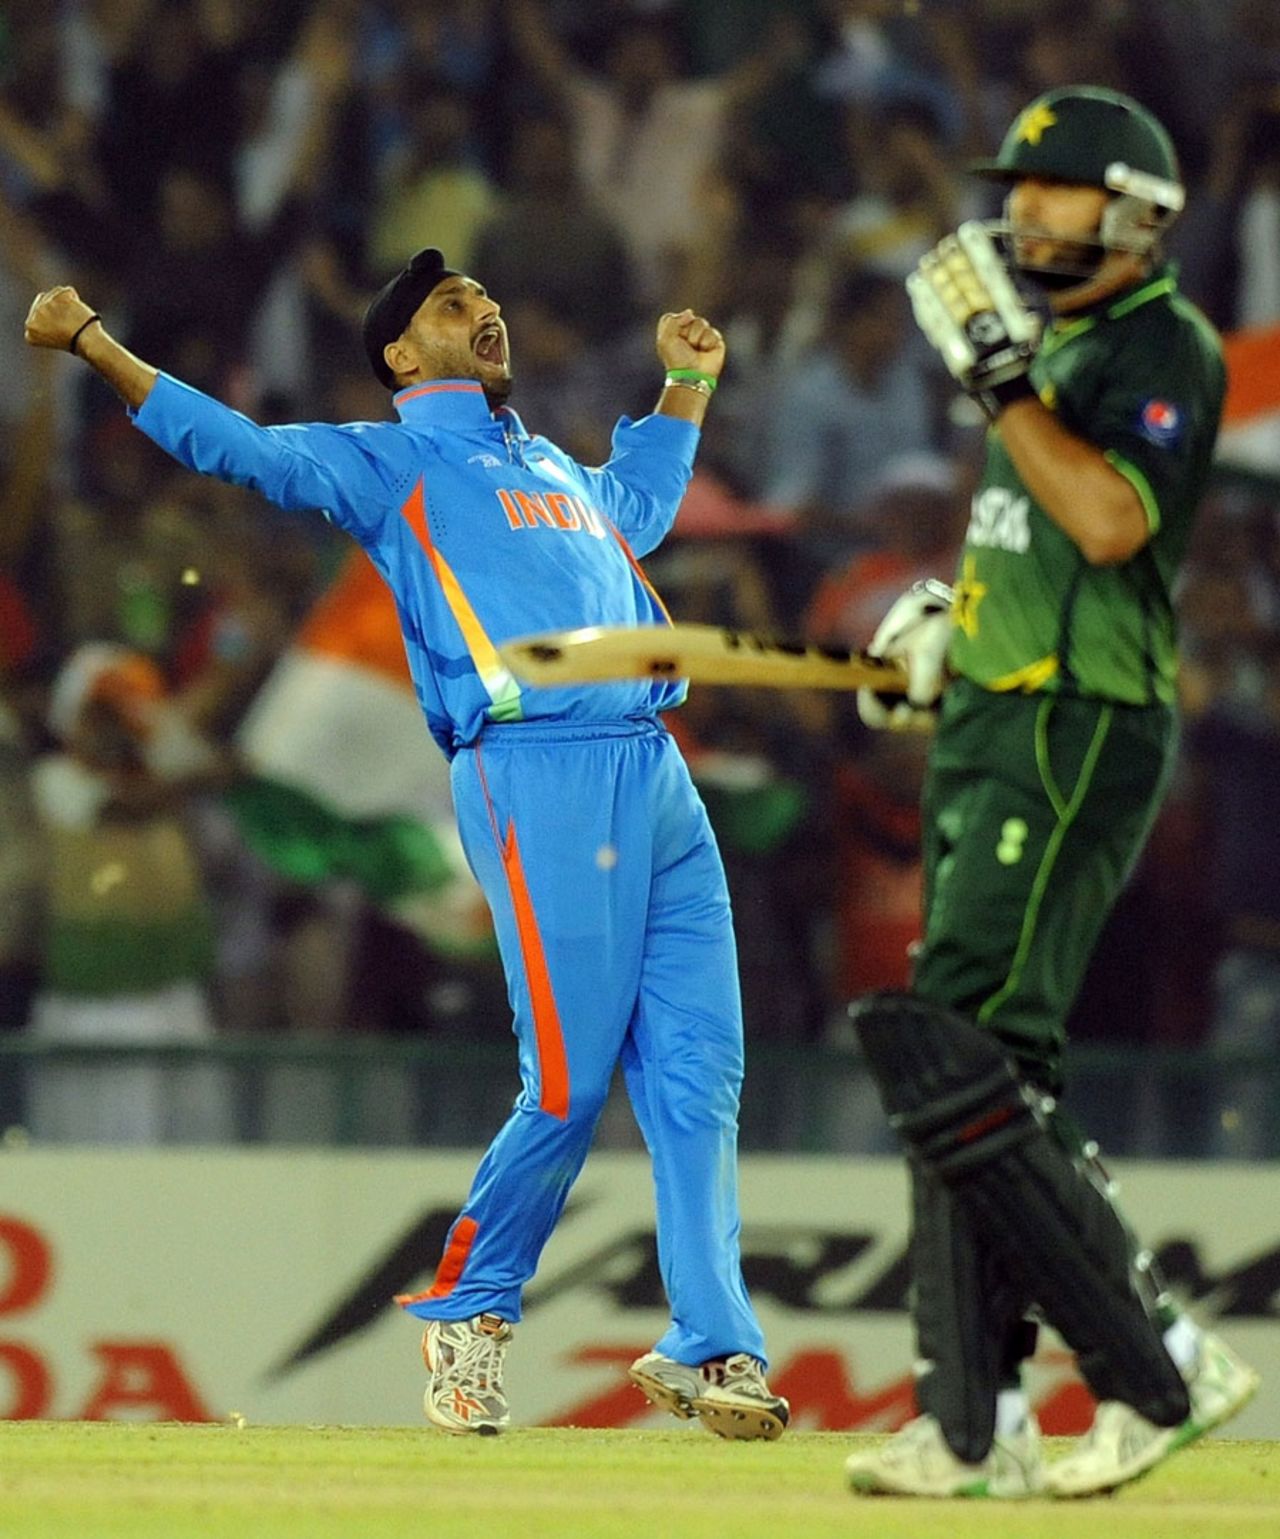 Contrasting emotions from Shahid Afridi and Harbhajan Singh after the former's dismissal, India v Pakistan, 2nd semi-final, World Cup 2011, Mohali, March 30, 2011